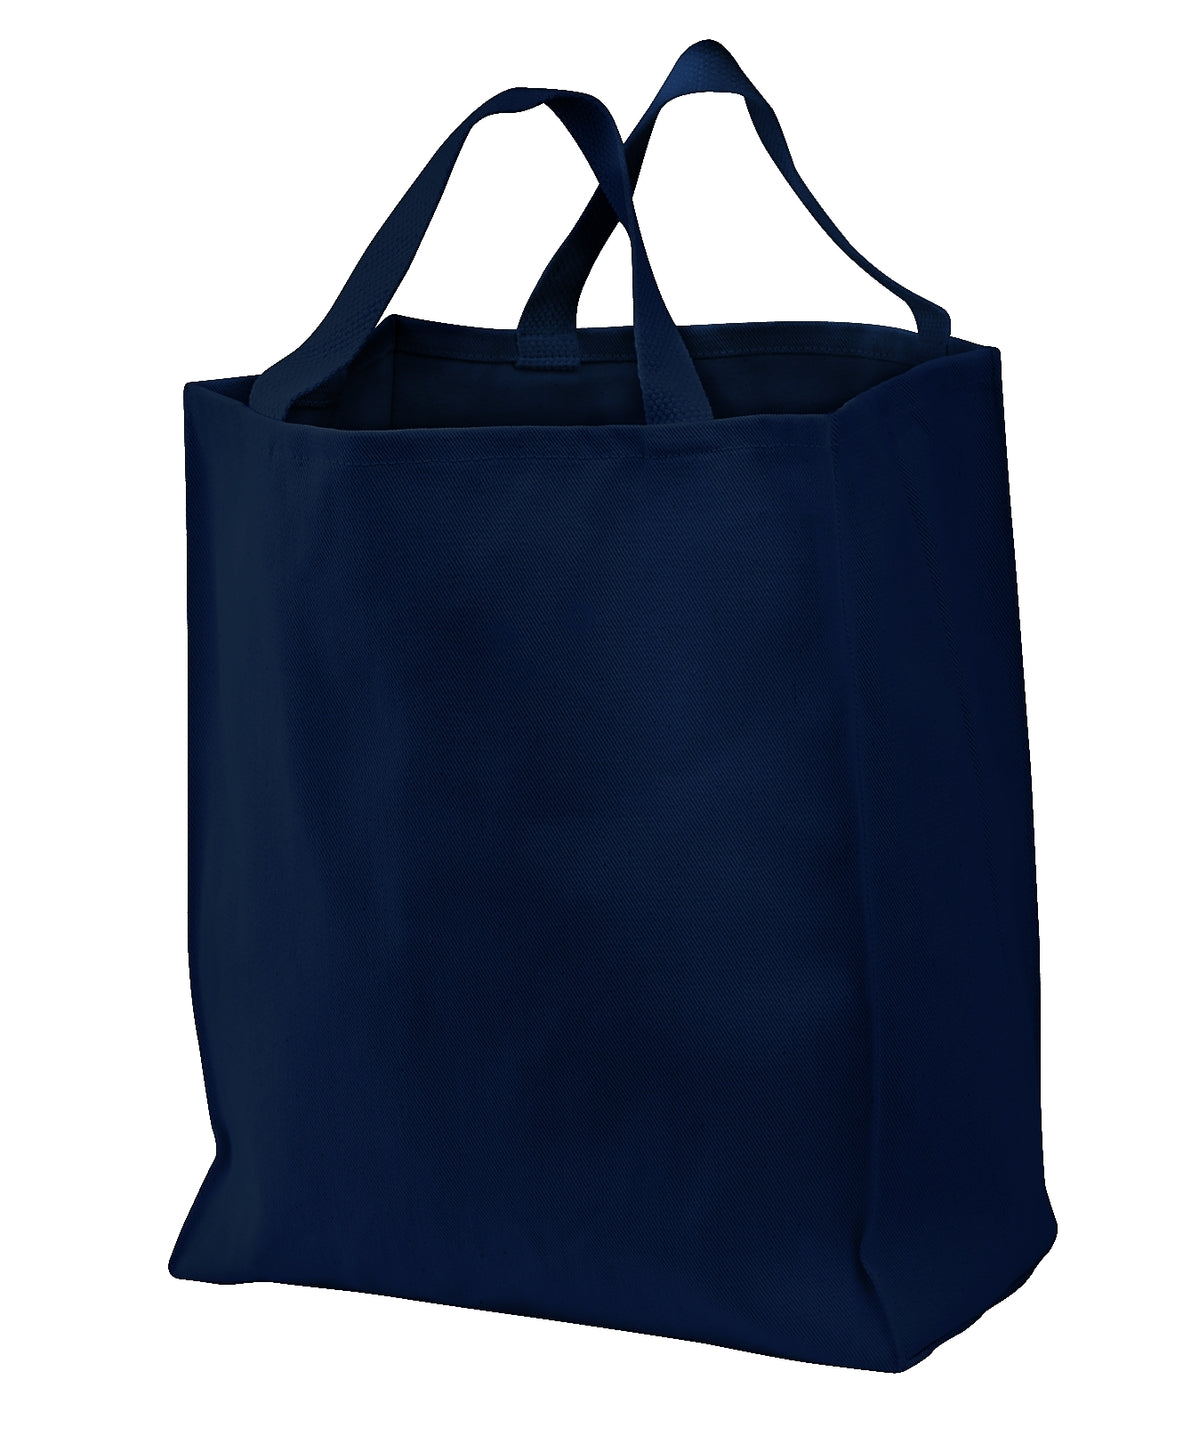 Port Authority® Ideal Twill Grocery Tote.  B100